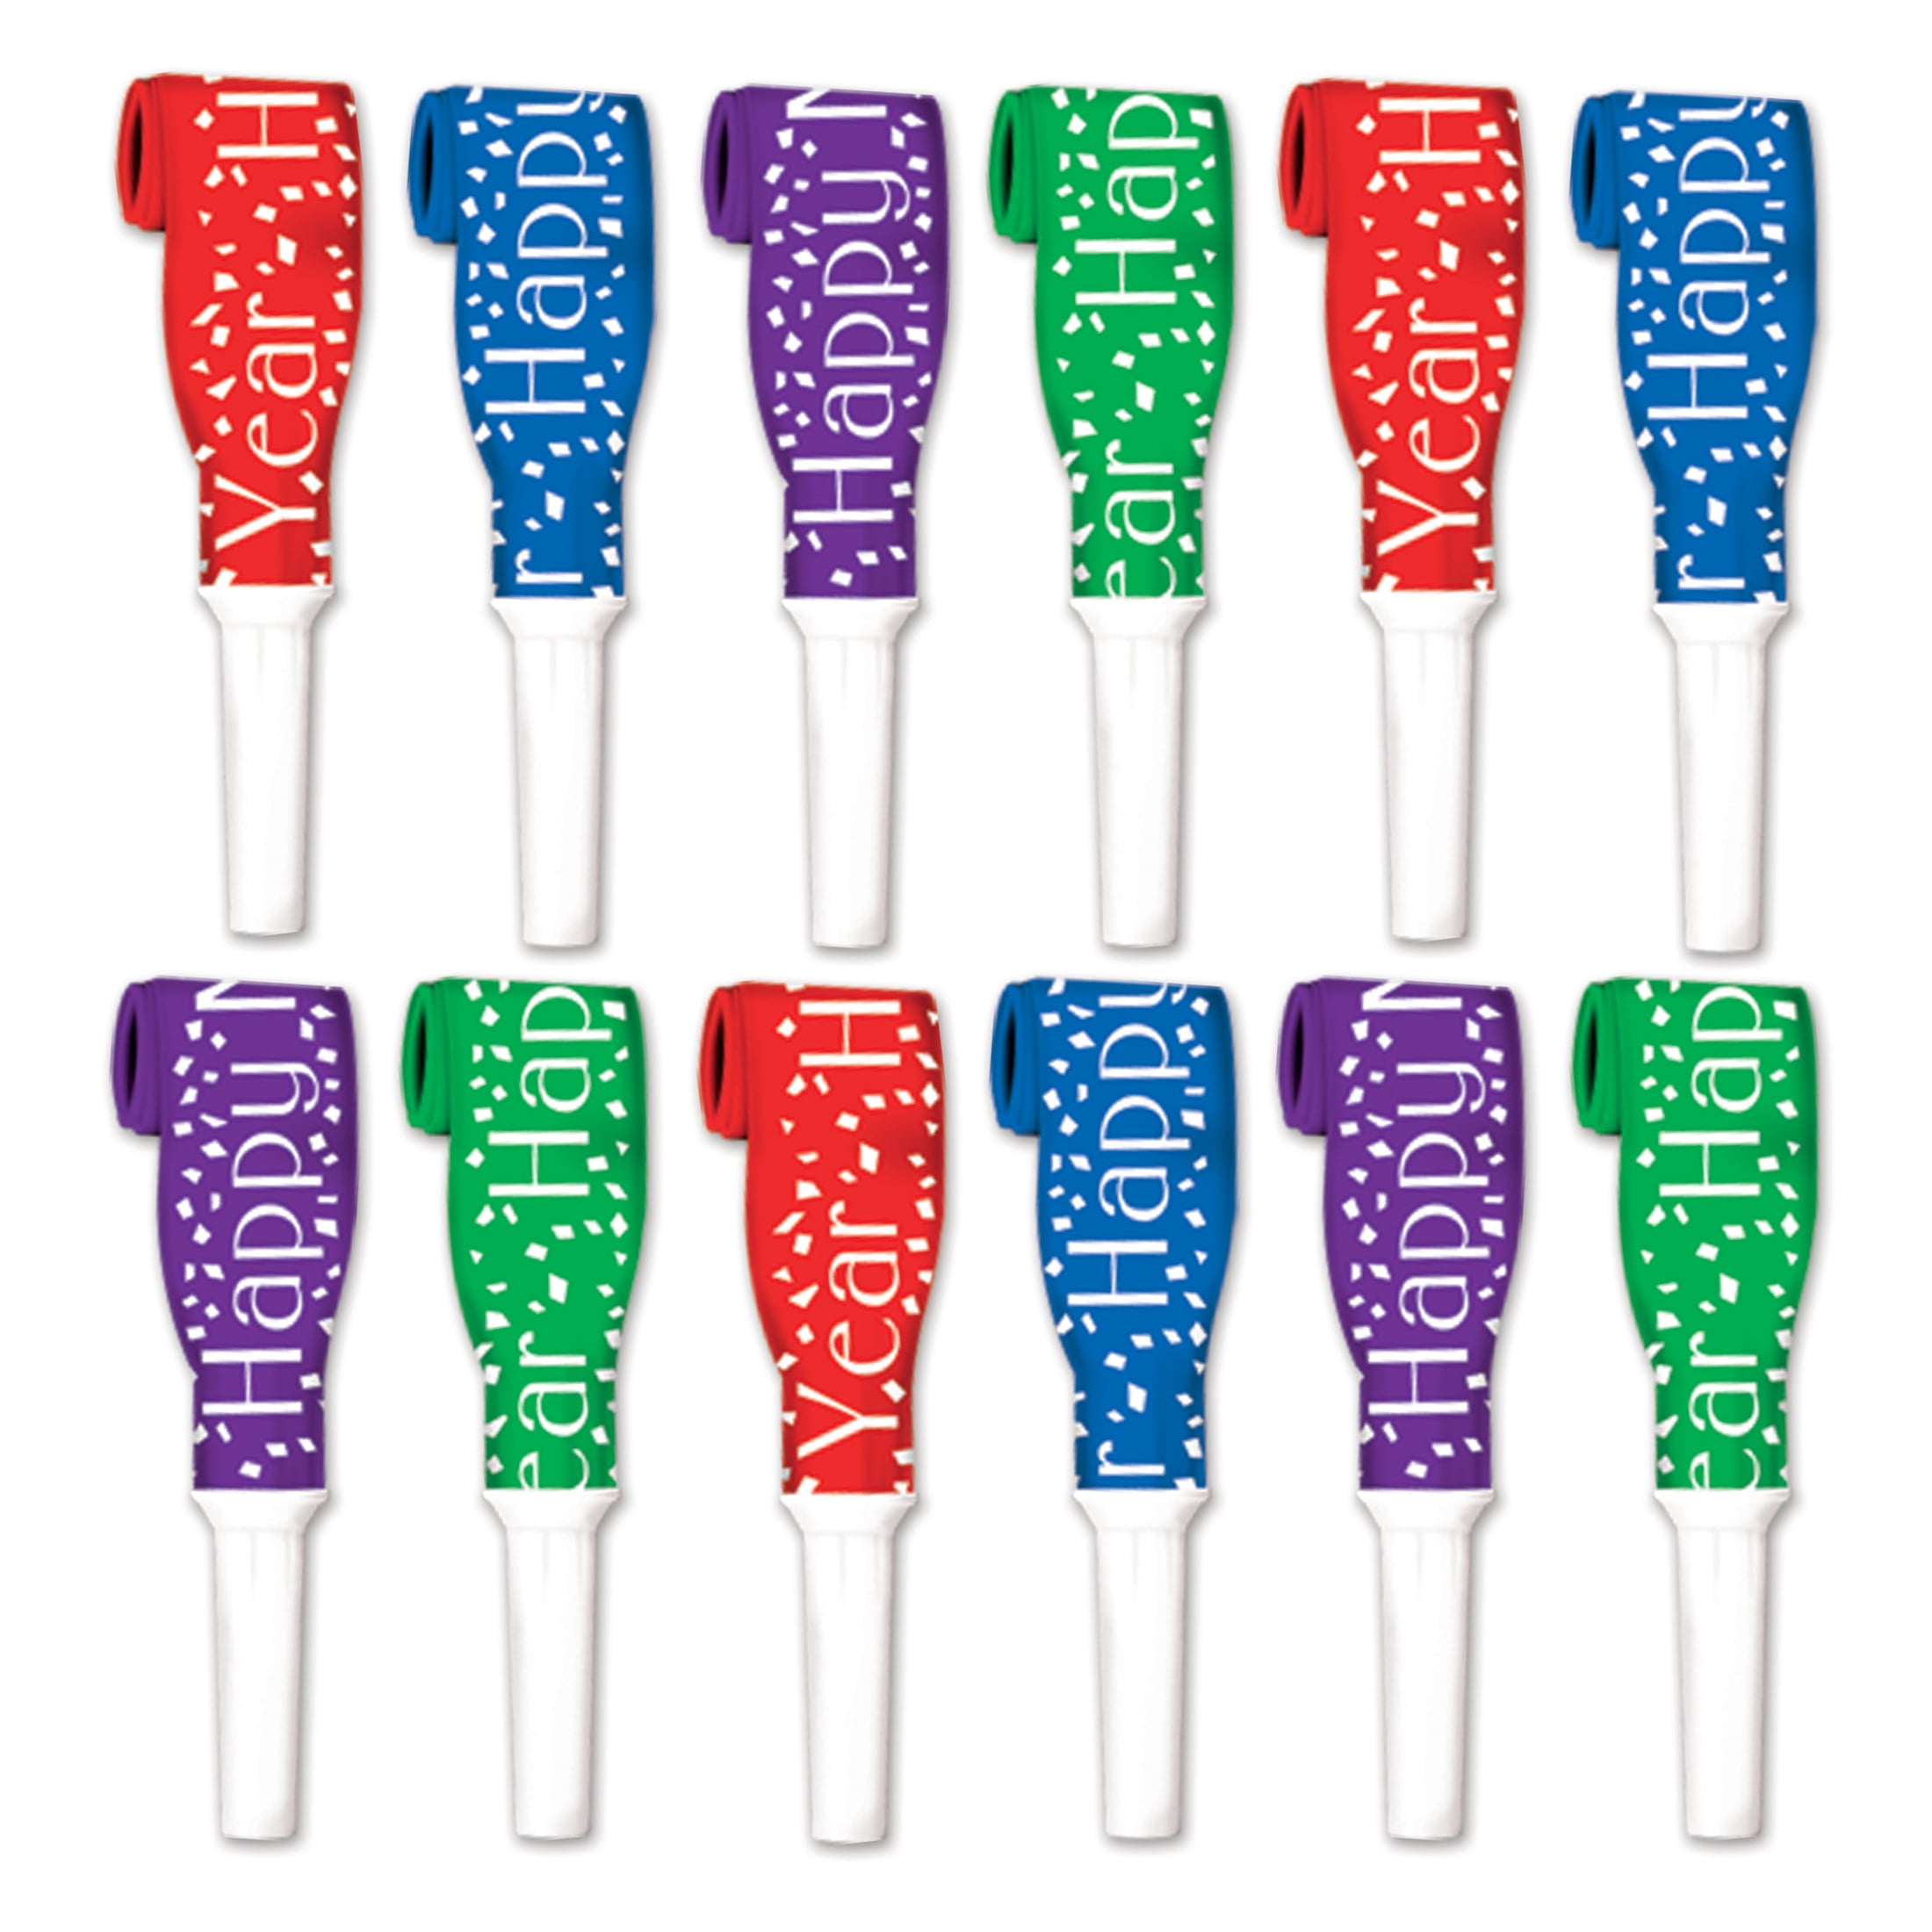 Beistle New Year's Eve Party Red, Blue, Green, and Purple Paper Blowout Noisemakers, 12/Pkg